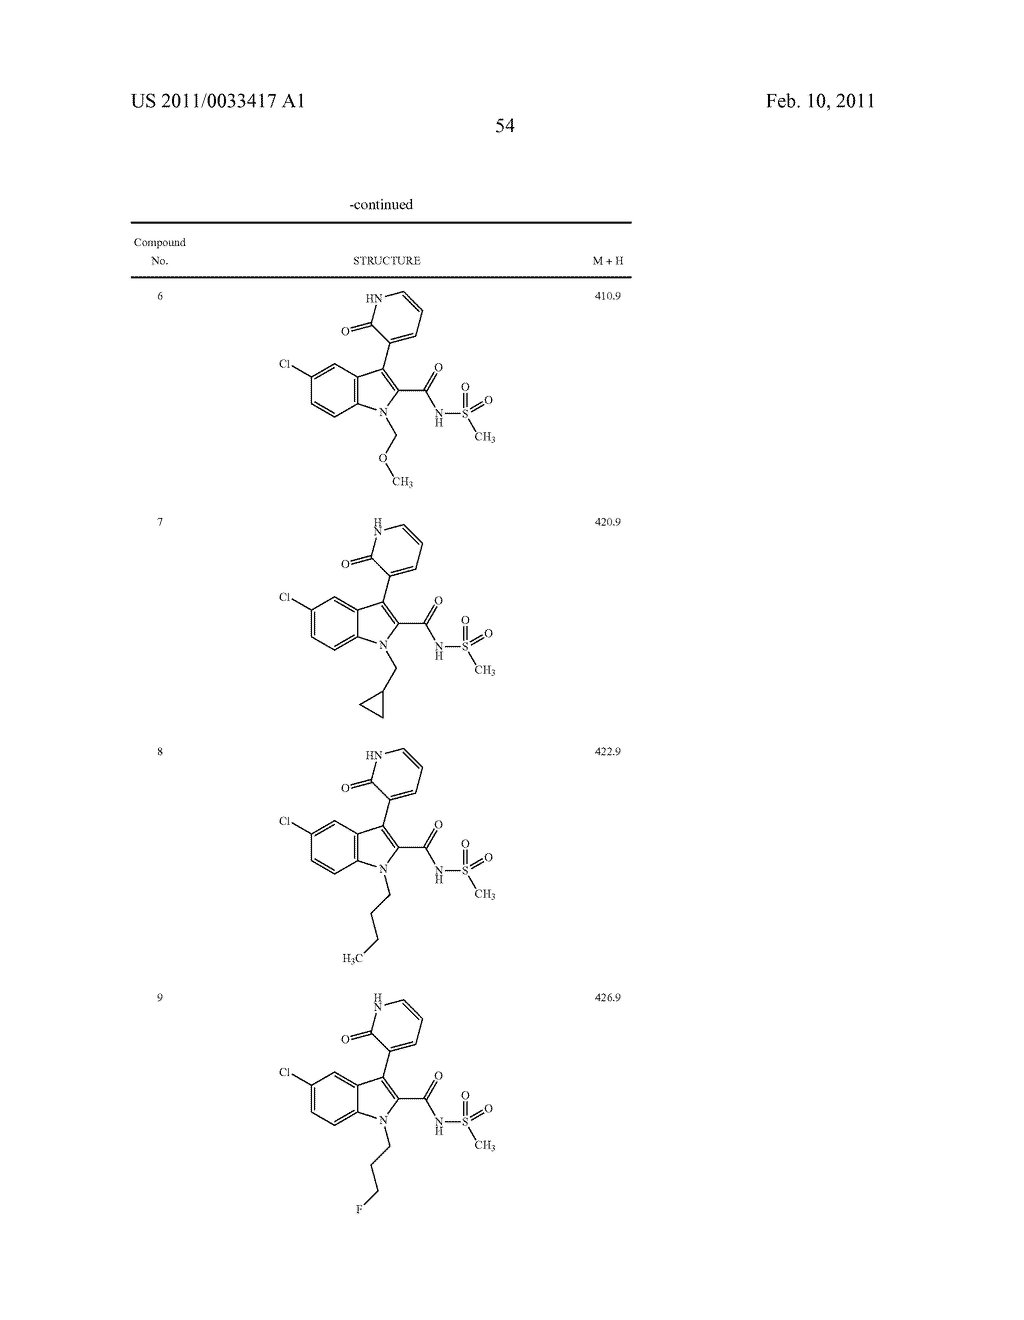 2,3-SUBSTITUTED INDOLE DERIVATIVES FOR TREATING VIRAL INFECTIONS - diagram, schematic, and image 55